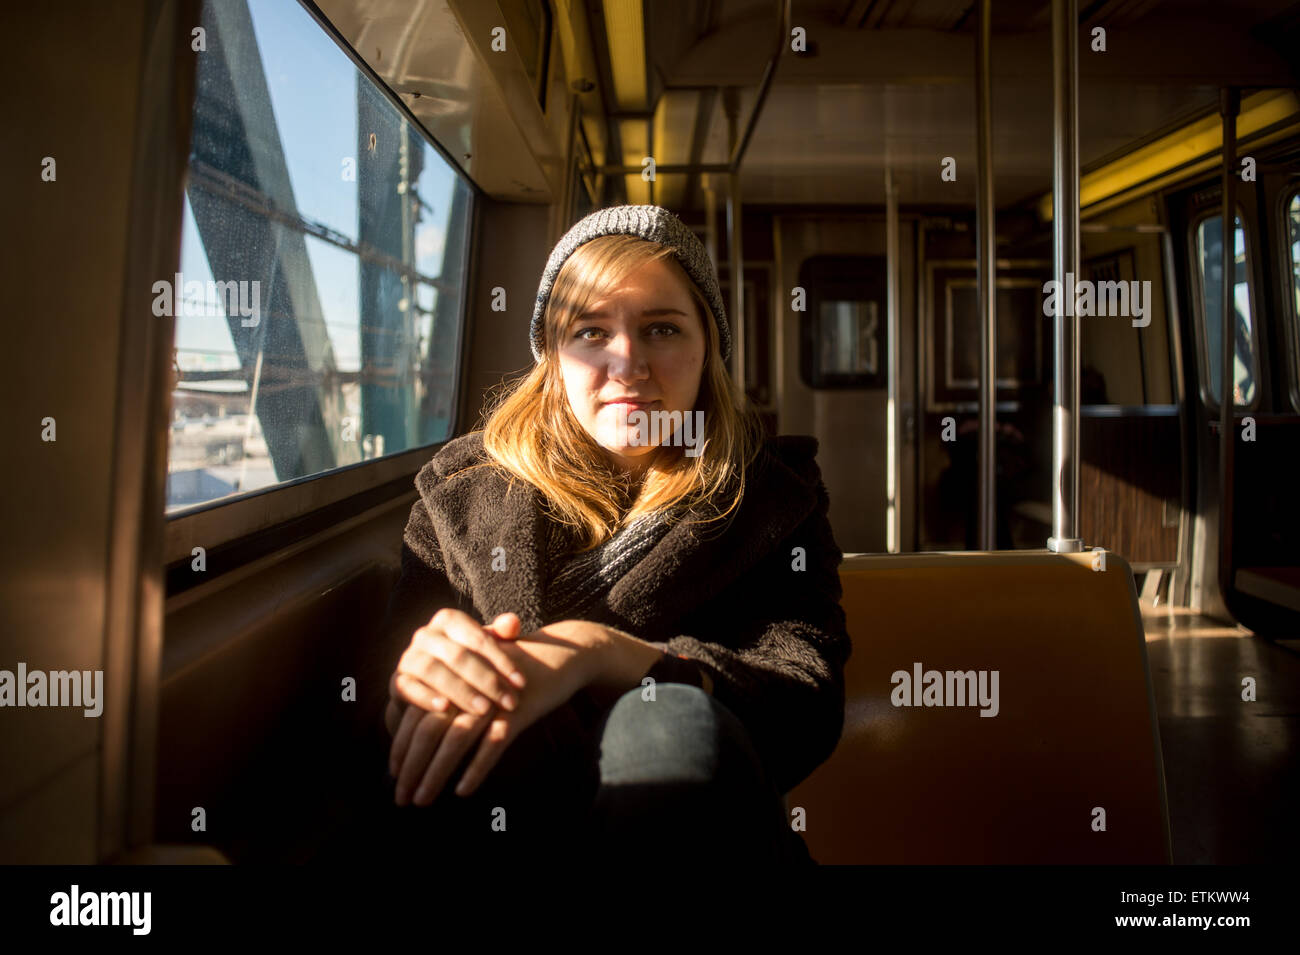 Young woman wearing a warm hat and coat sitting inside a subway train near New York, New York, USA Stock Photo